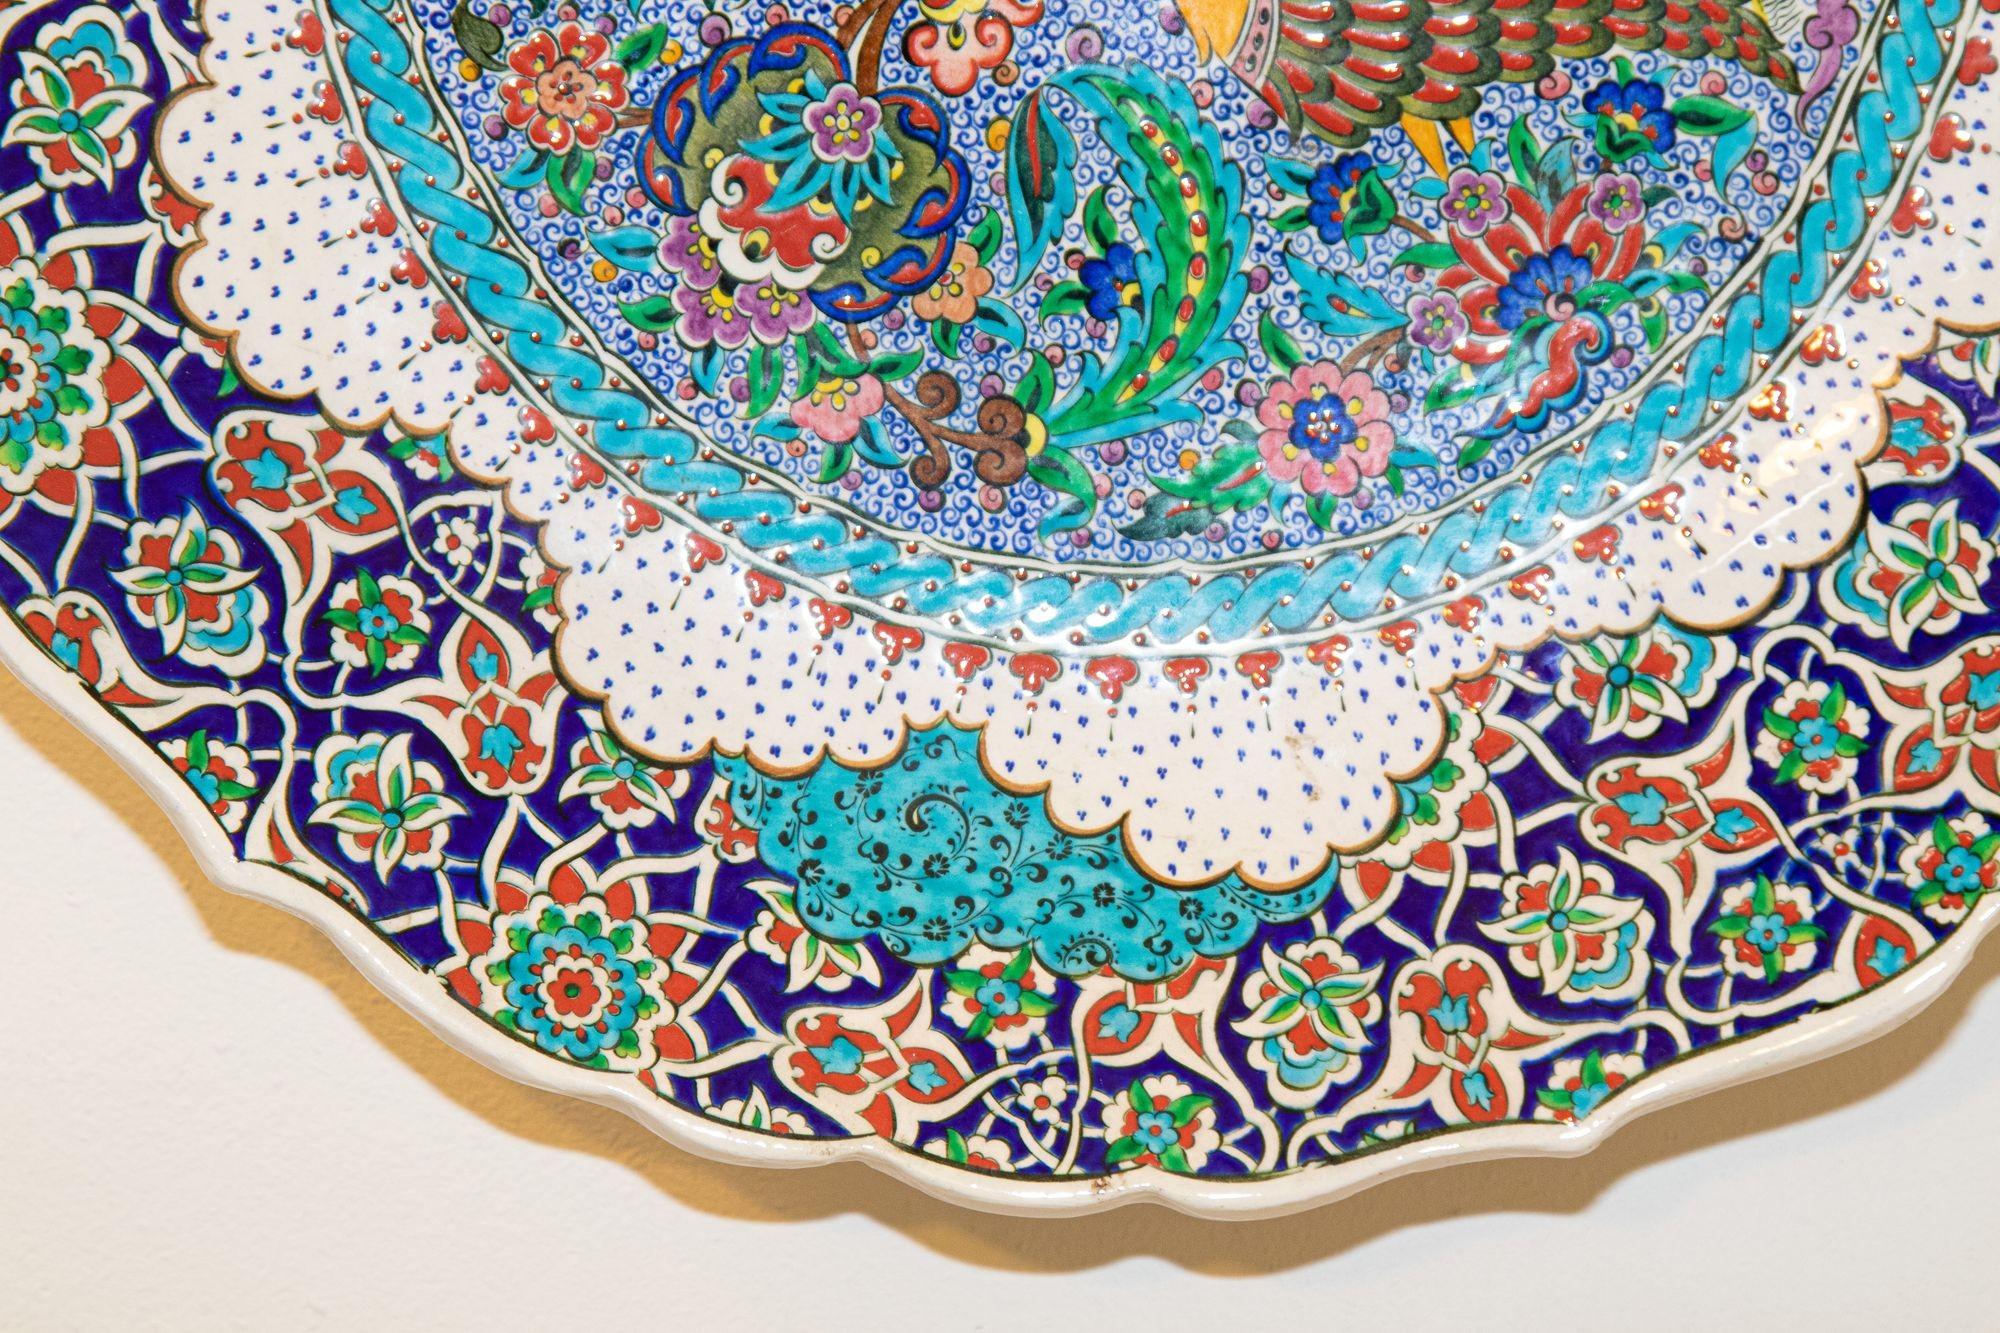 Handmade decorative wall plate, hand painted by artist Saim Kolhan.
Hand Painted large Decorative wall plate after an original Iznik 16th C. Ottoman design.
This plate is hand painted with an intricate design with a peacock in the center and